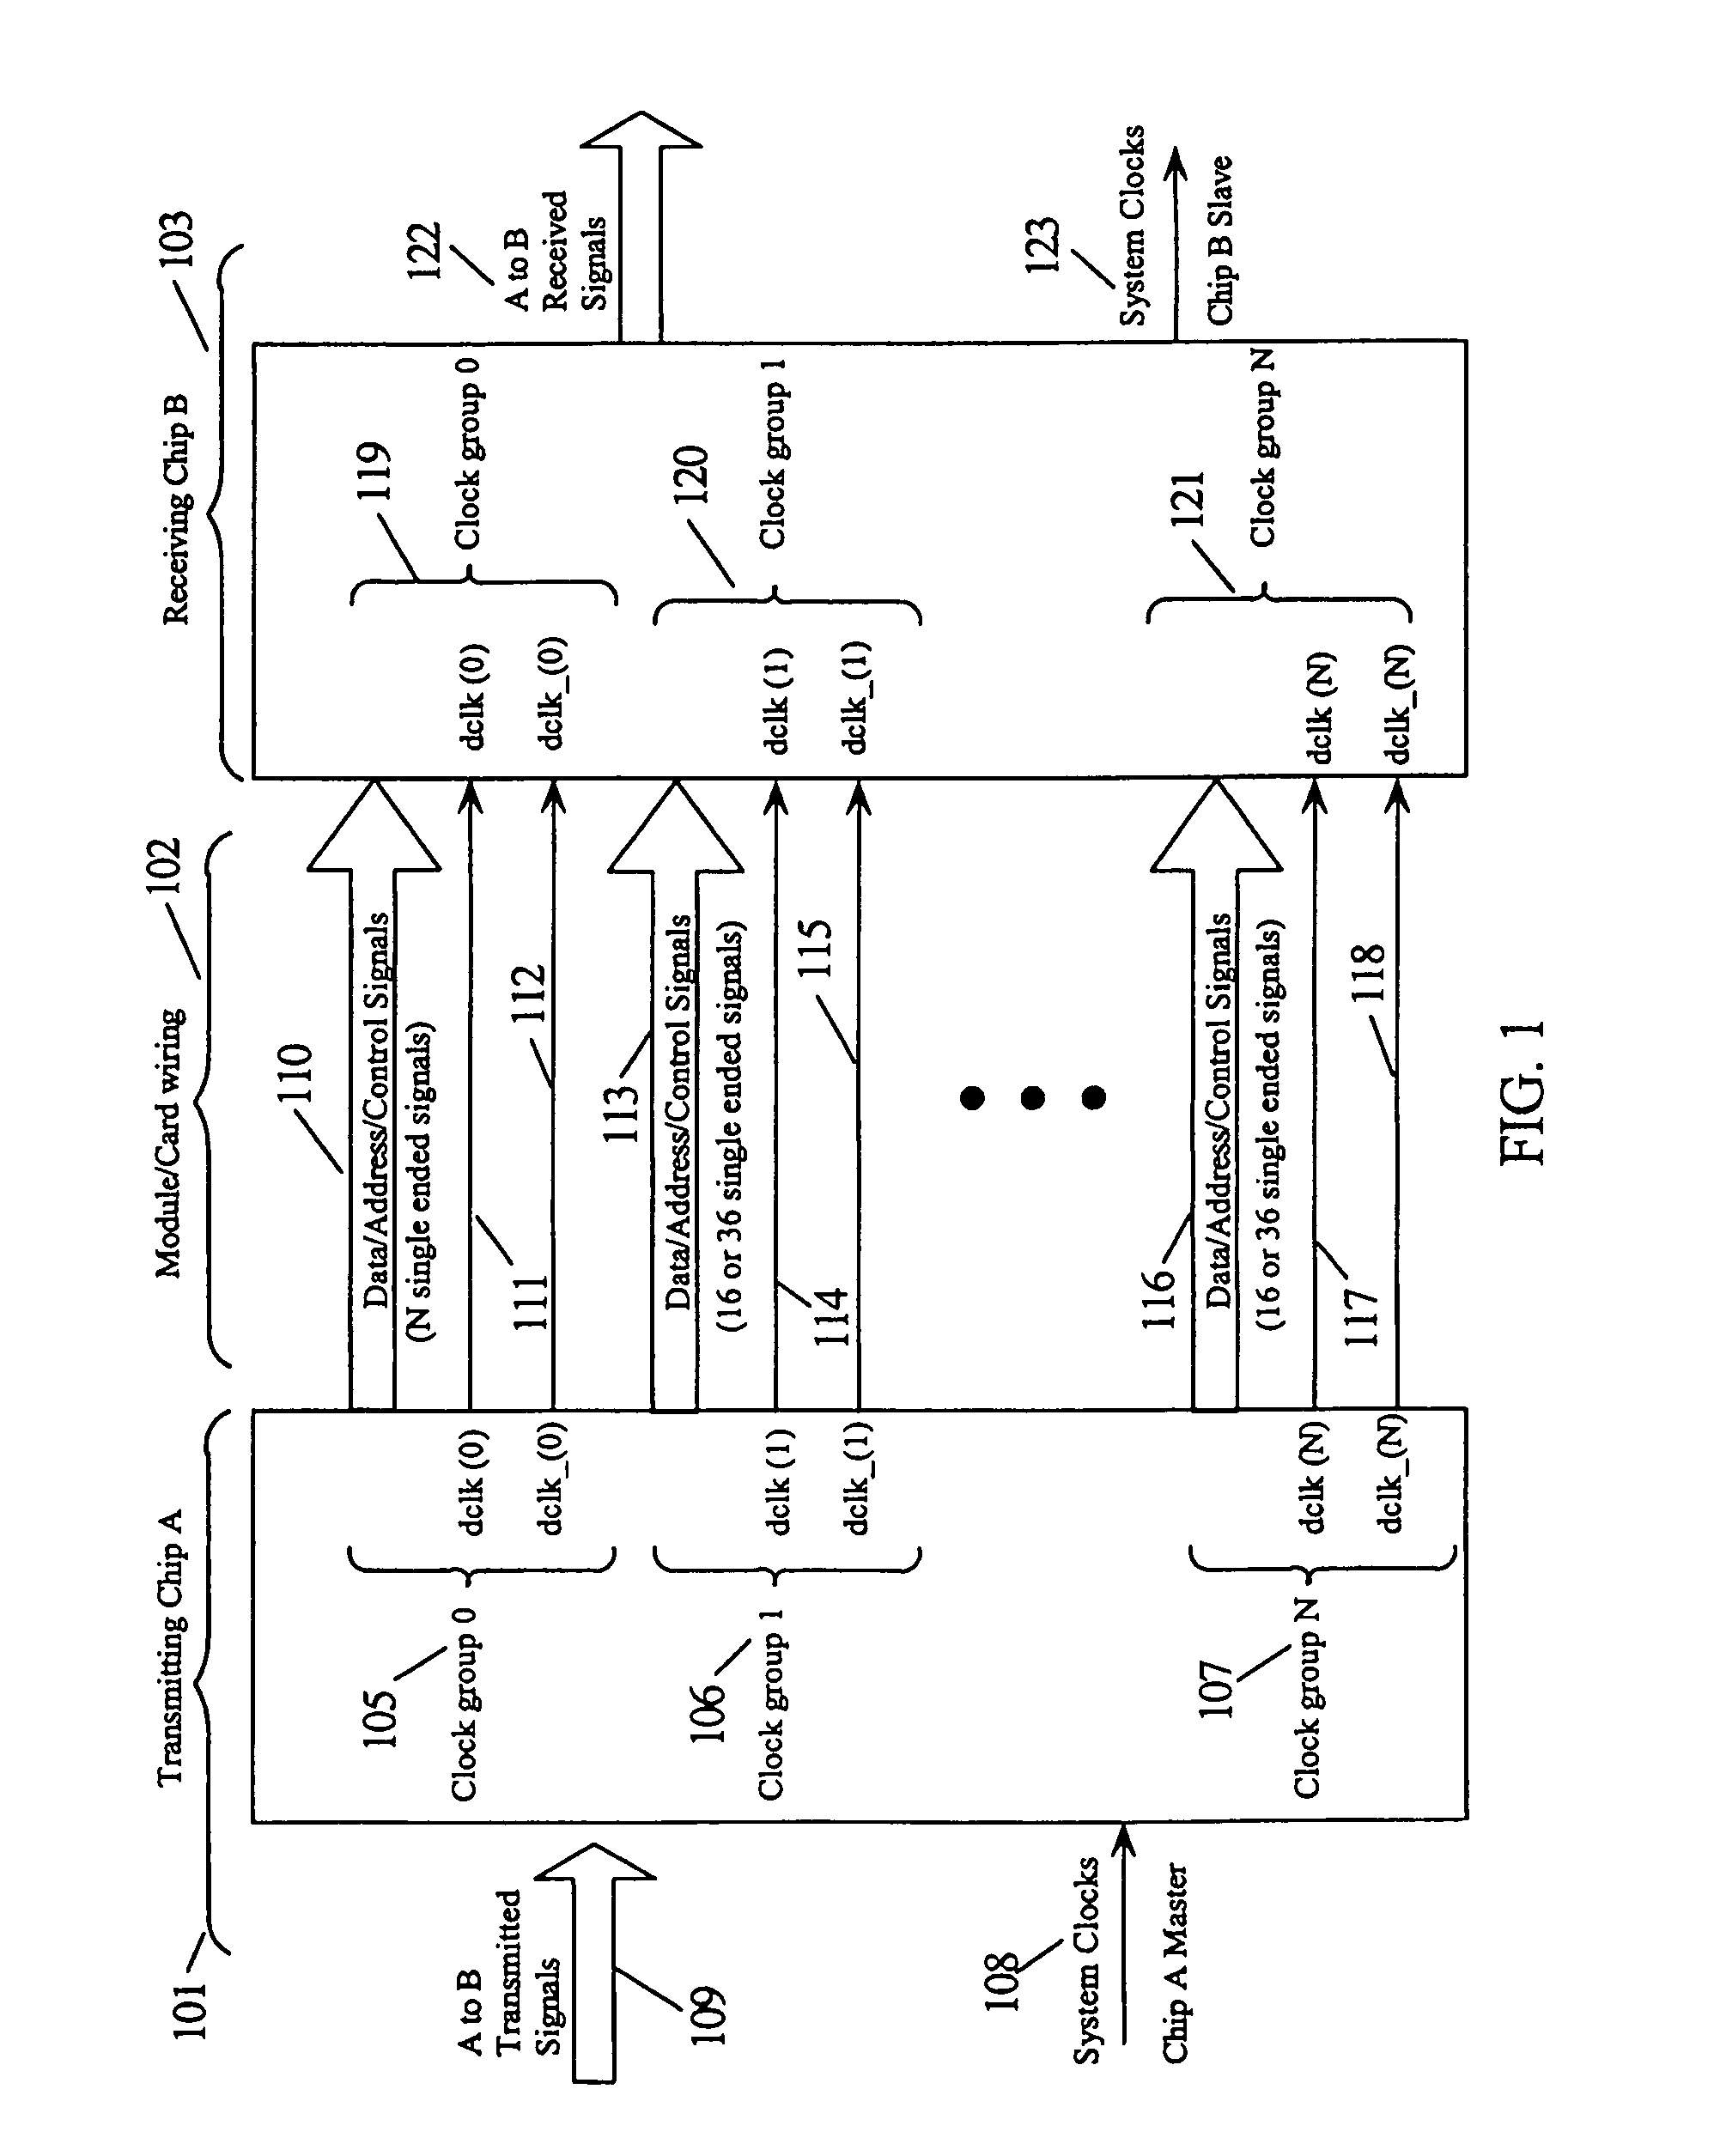 Circuit for optimizing a delay line used to de-skew received data signals relative to a received clock signal